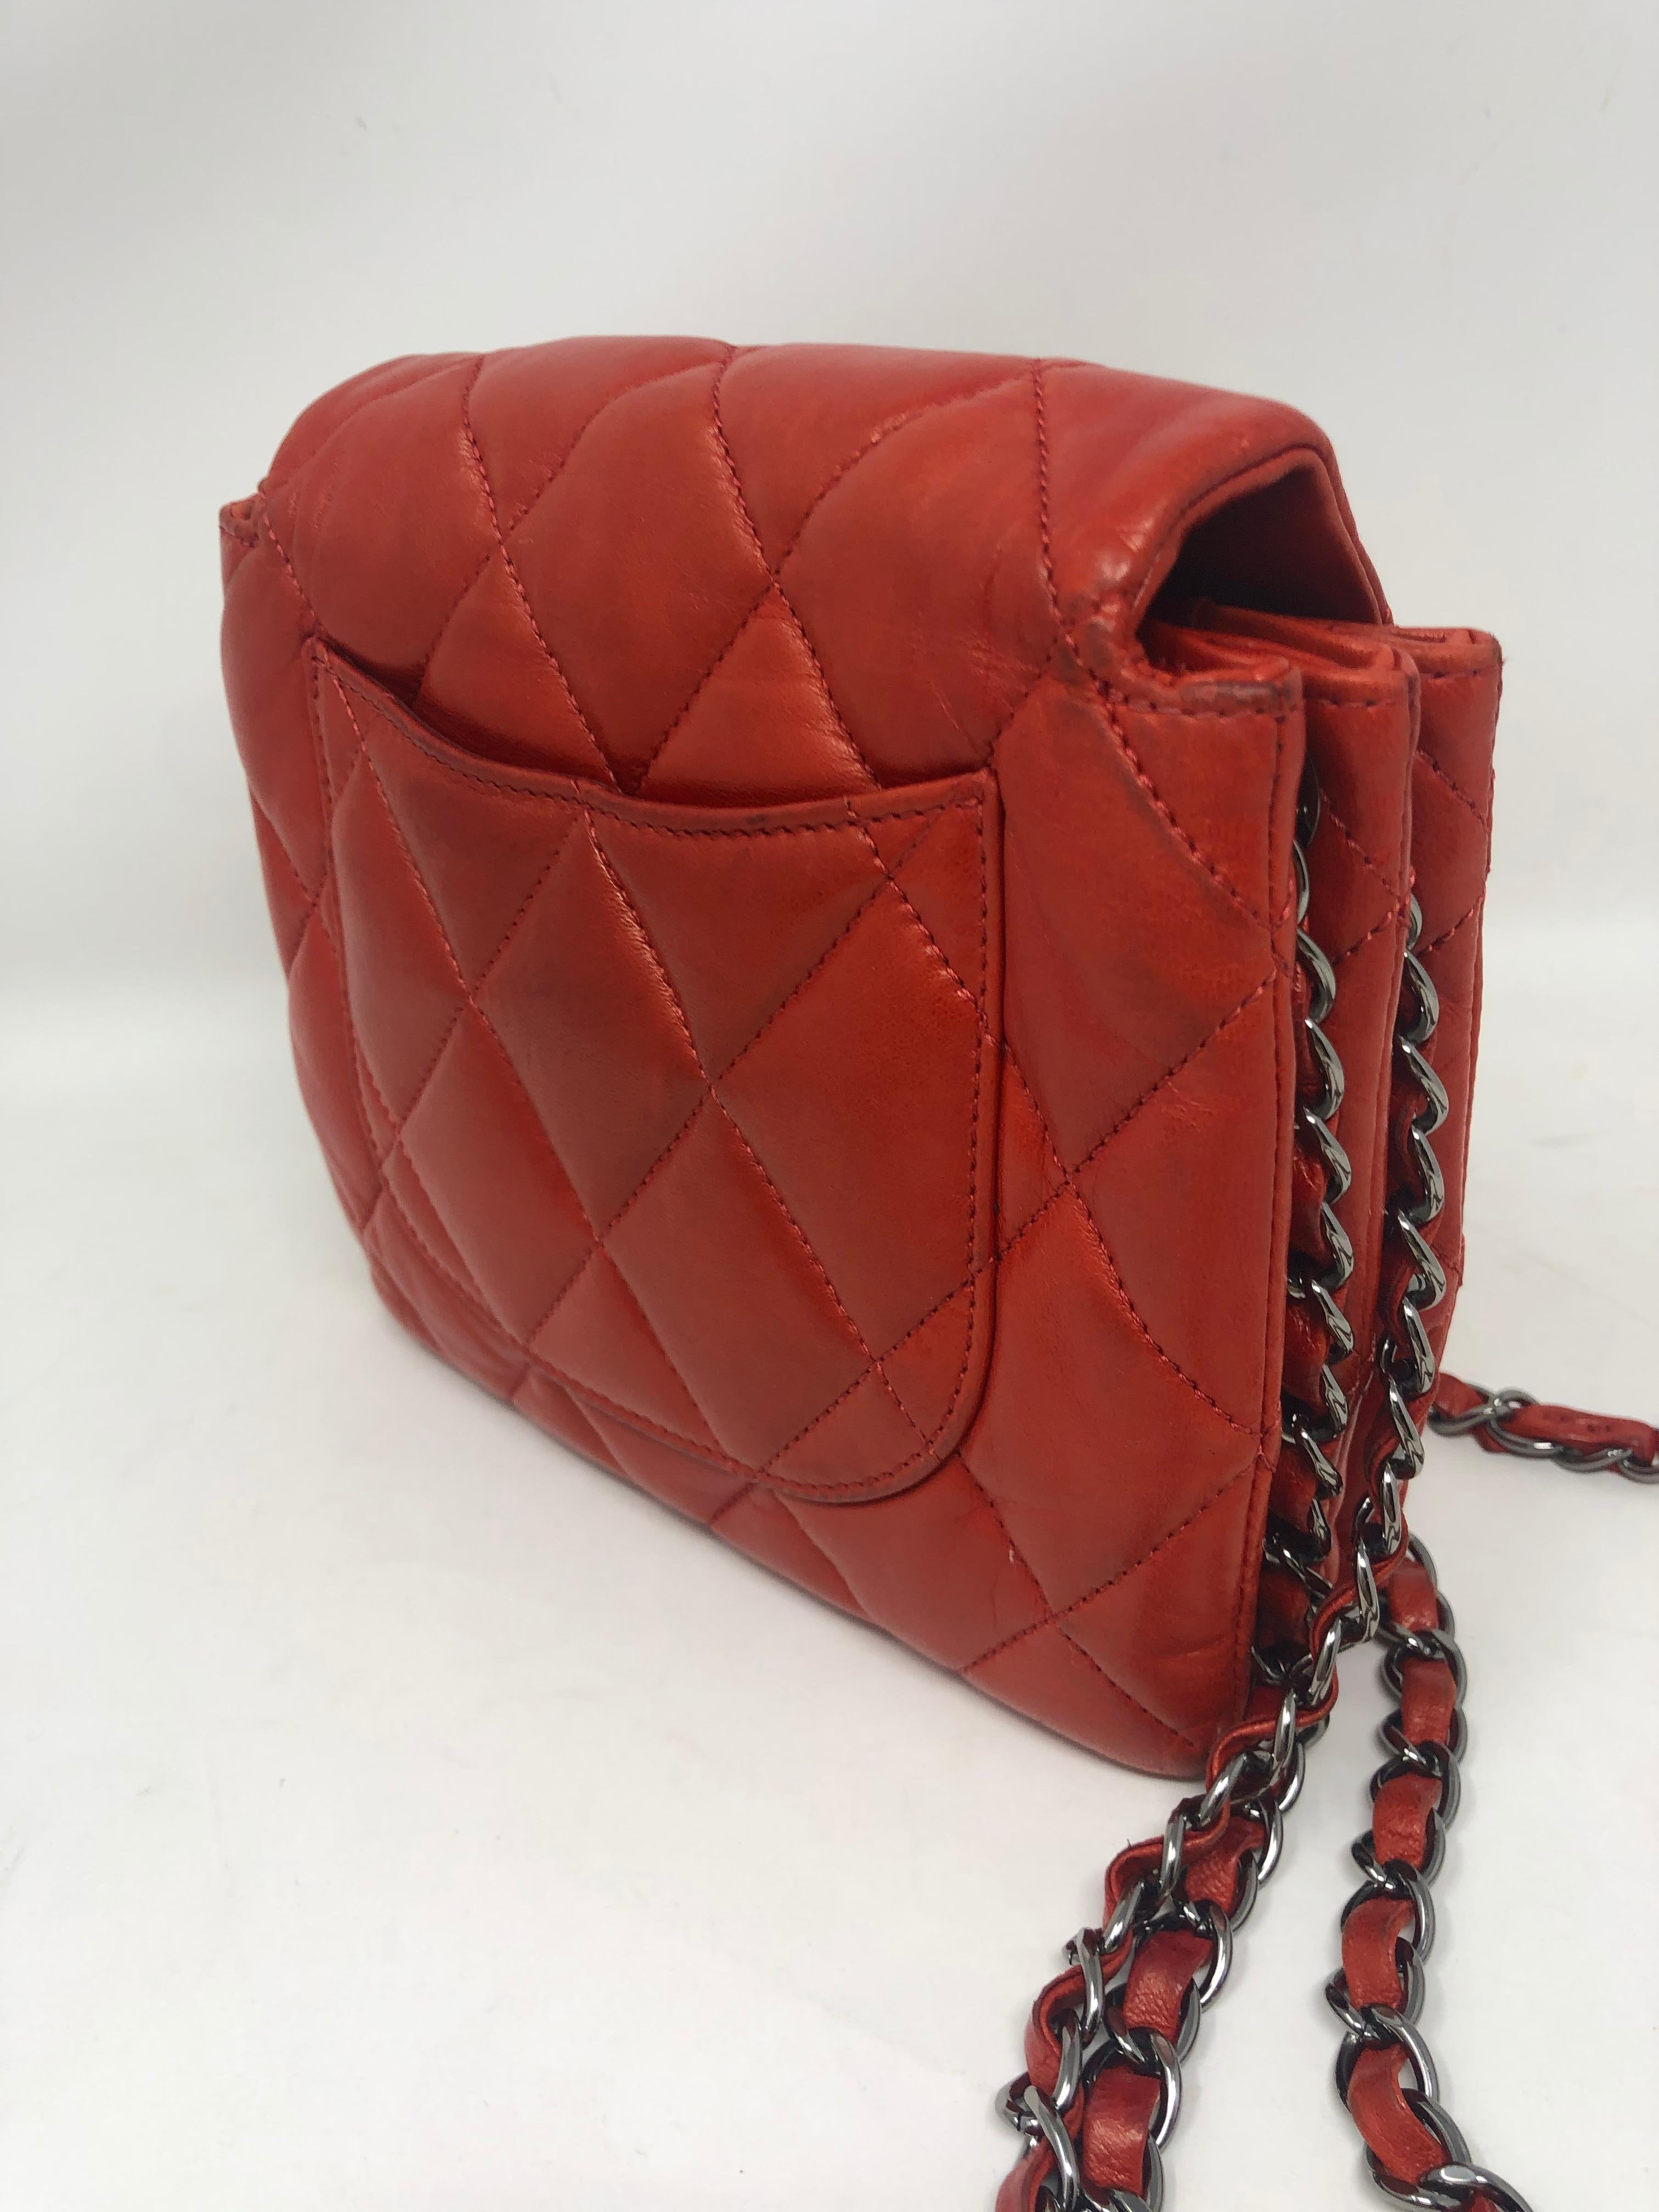 Women's or Men's Chanel Red Leather Bag 